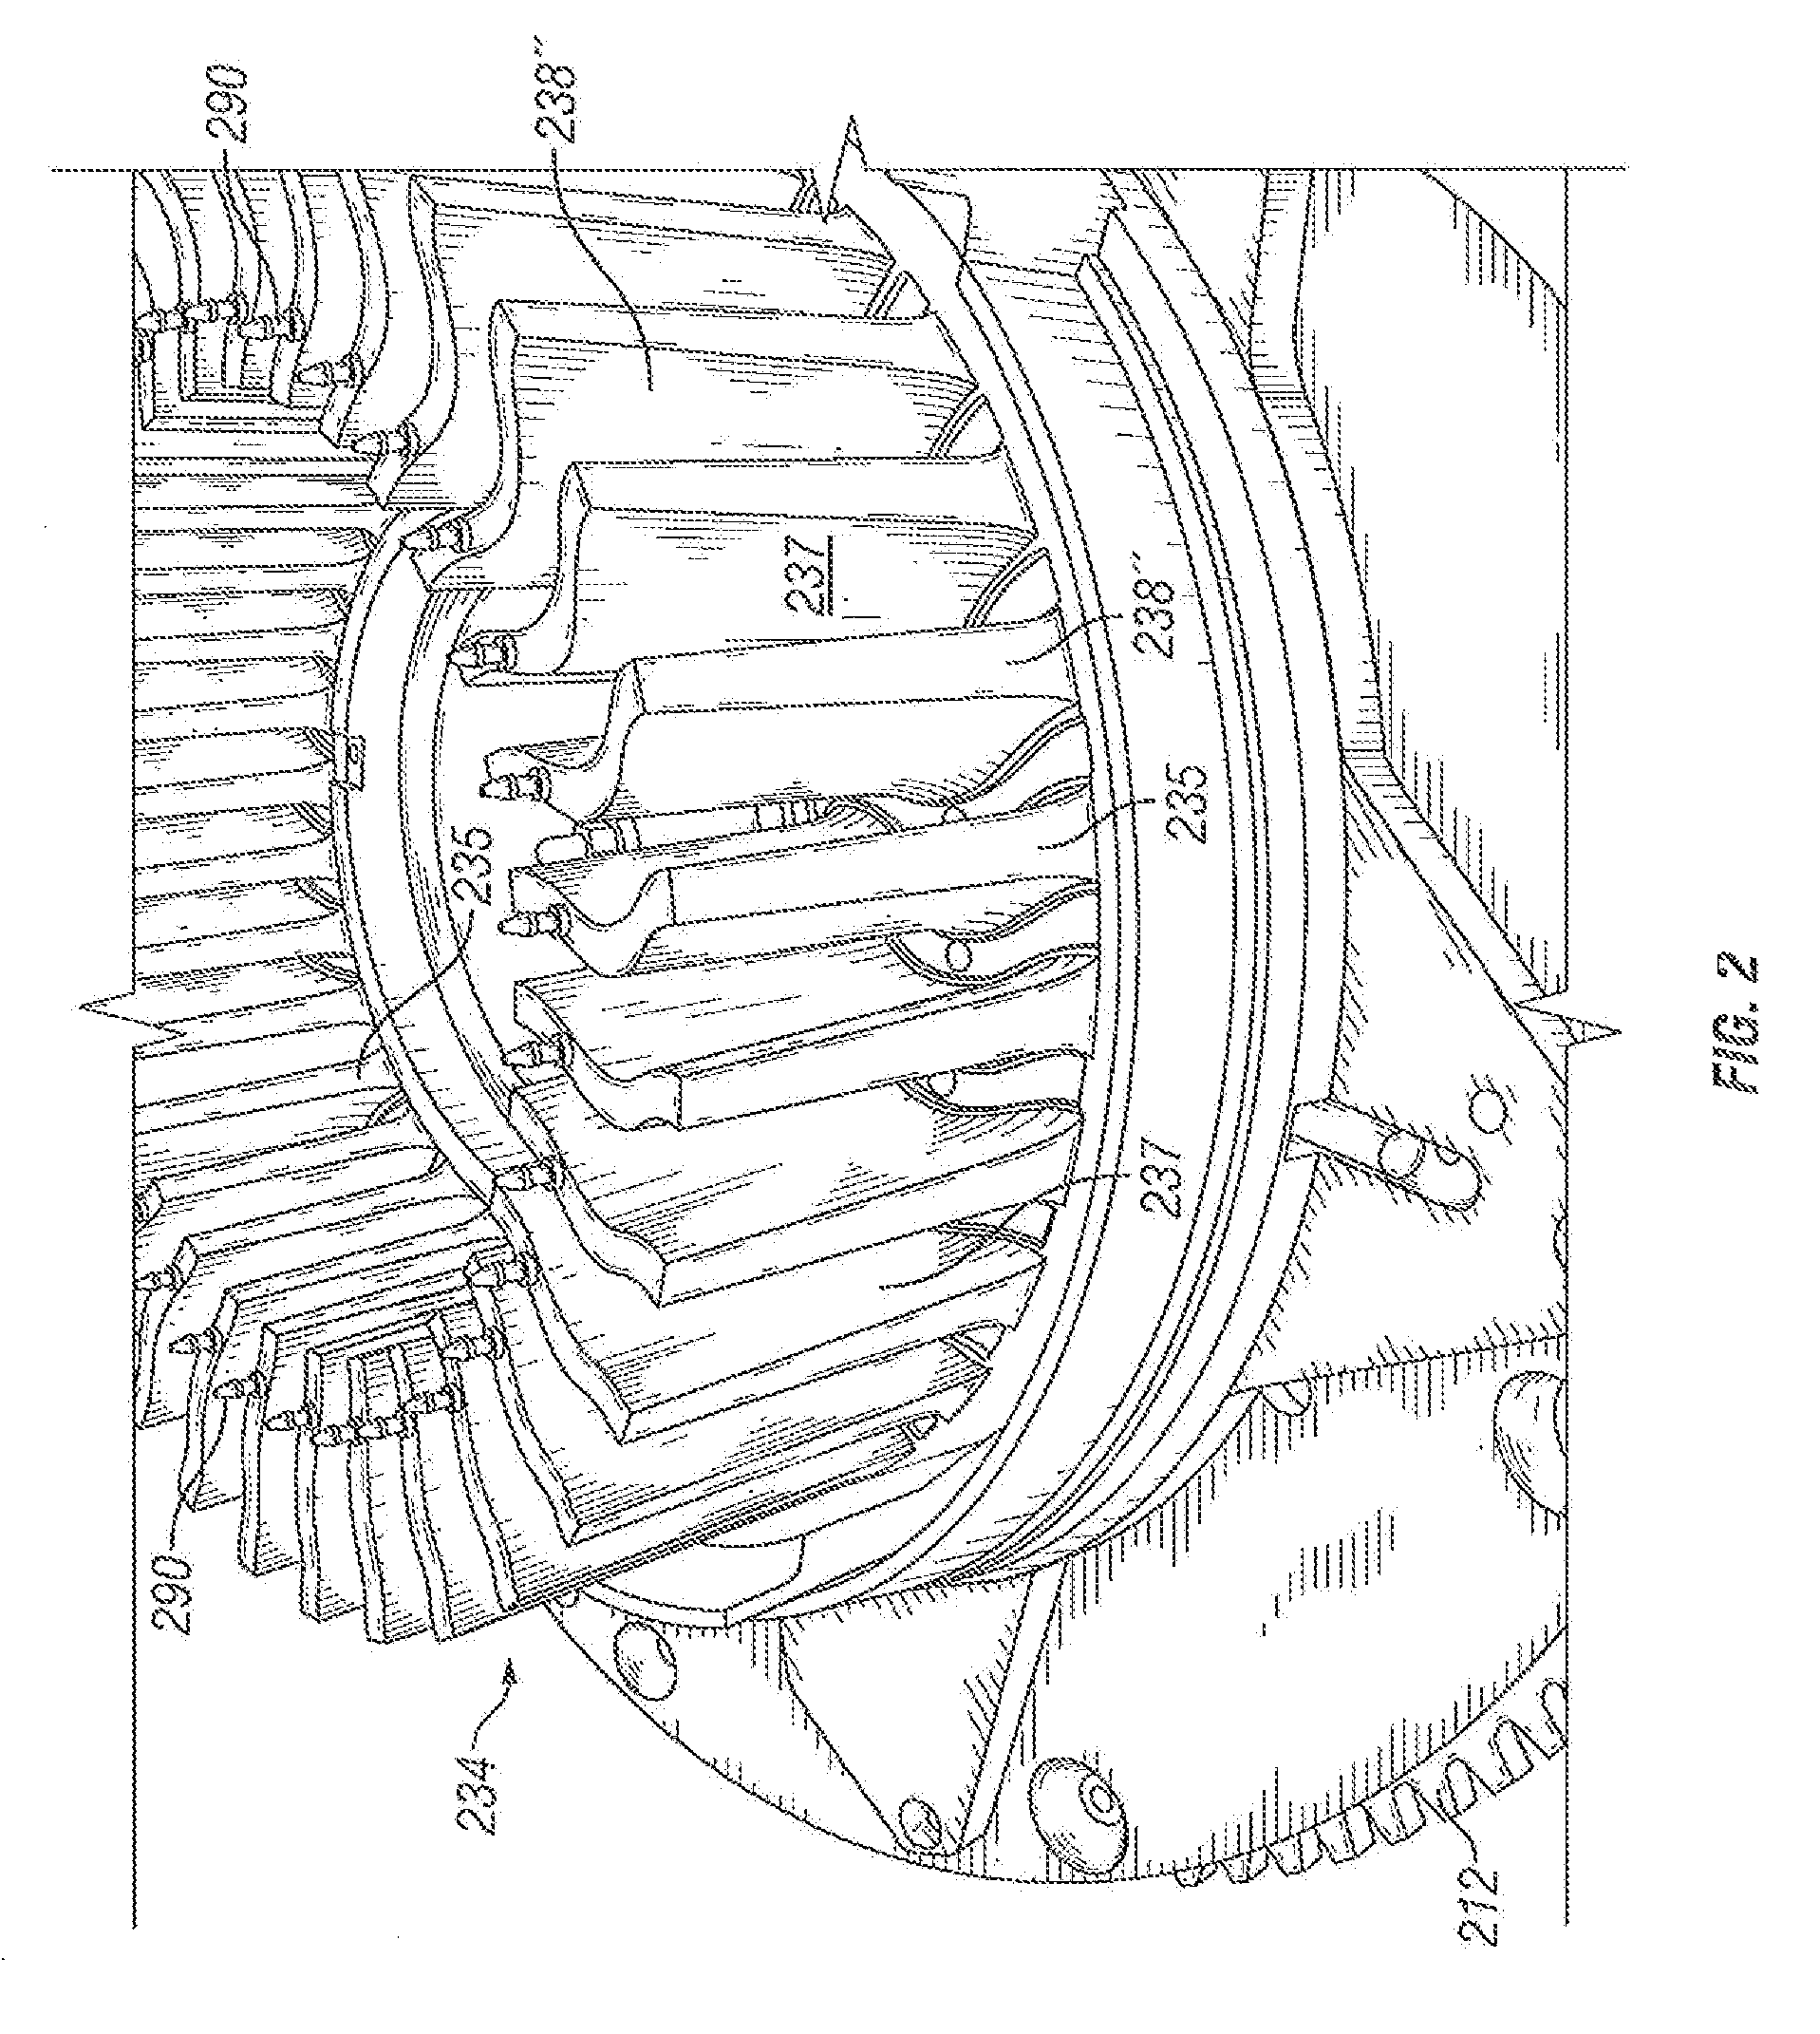 Apparatus for casting a non-pneumatic tire having a floating mold alignment mechanism